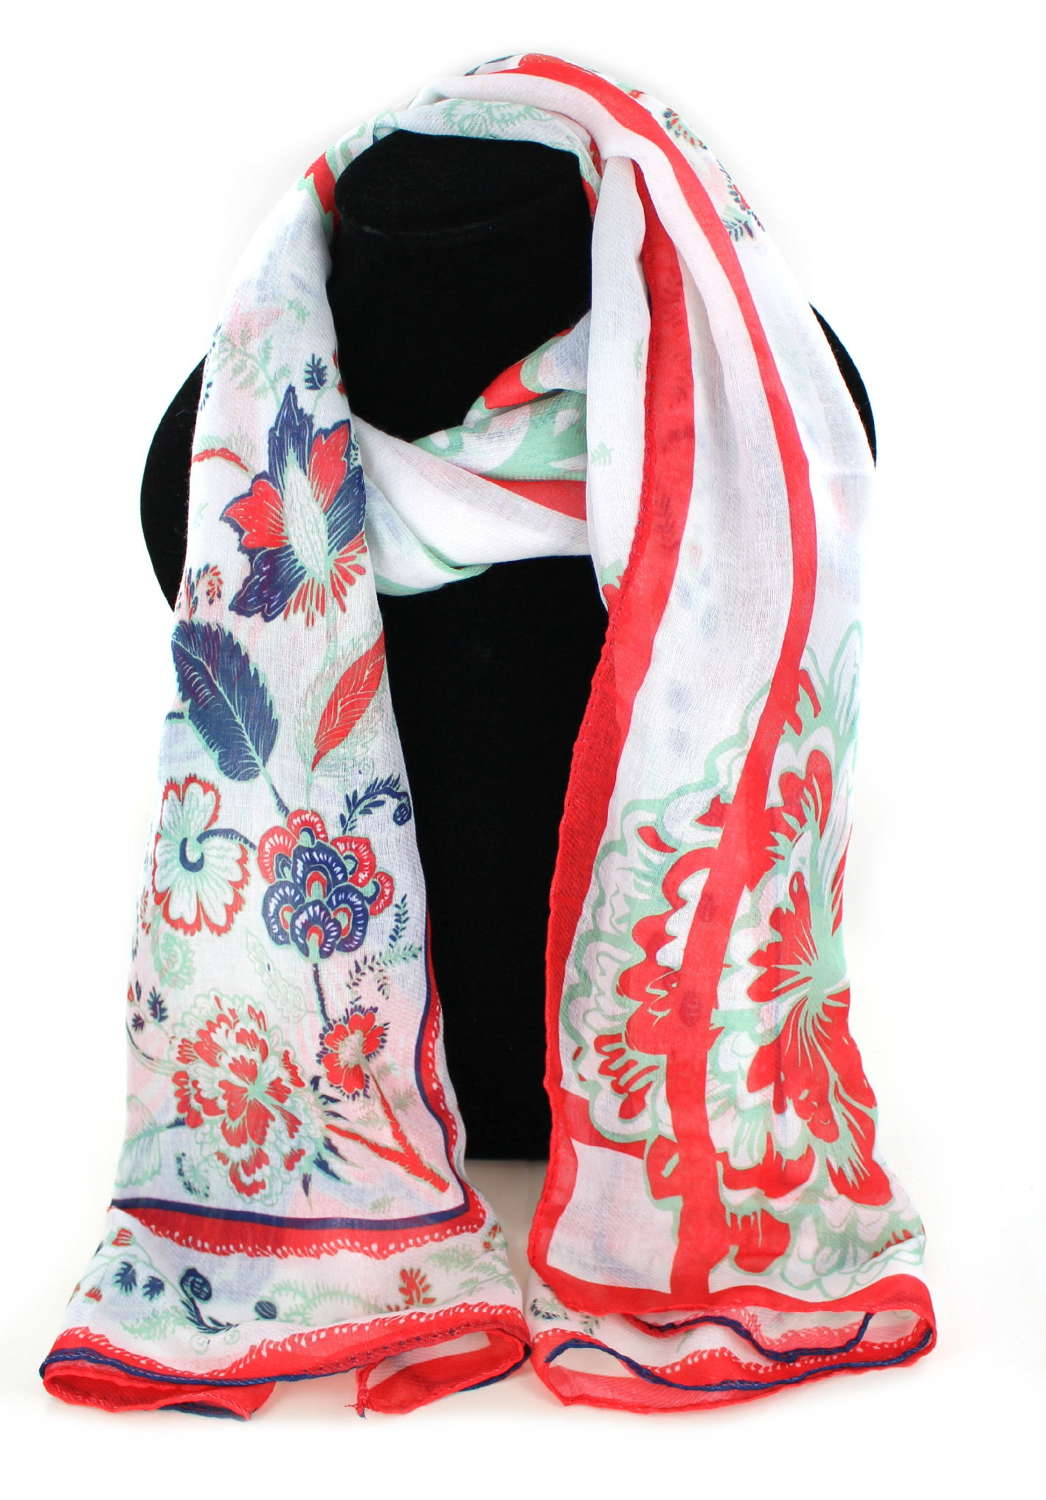 Feather and floral pattern recycled Polyester scarf.